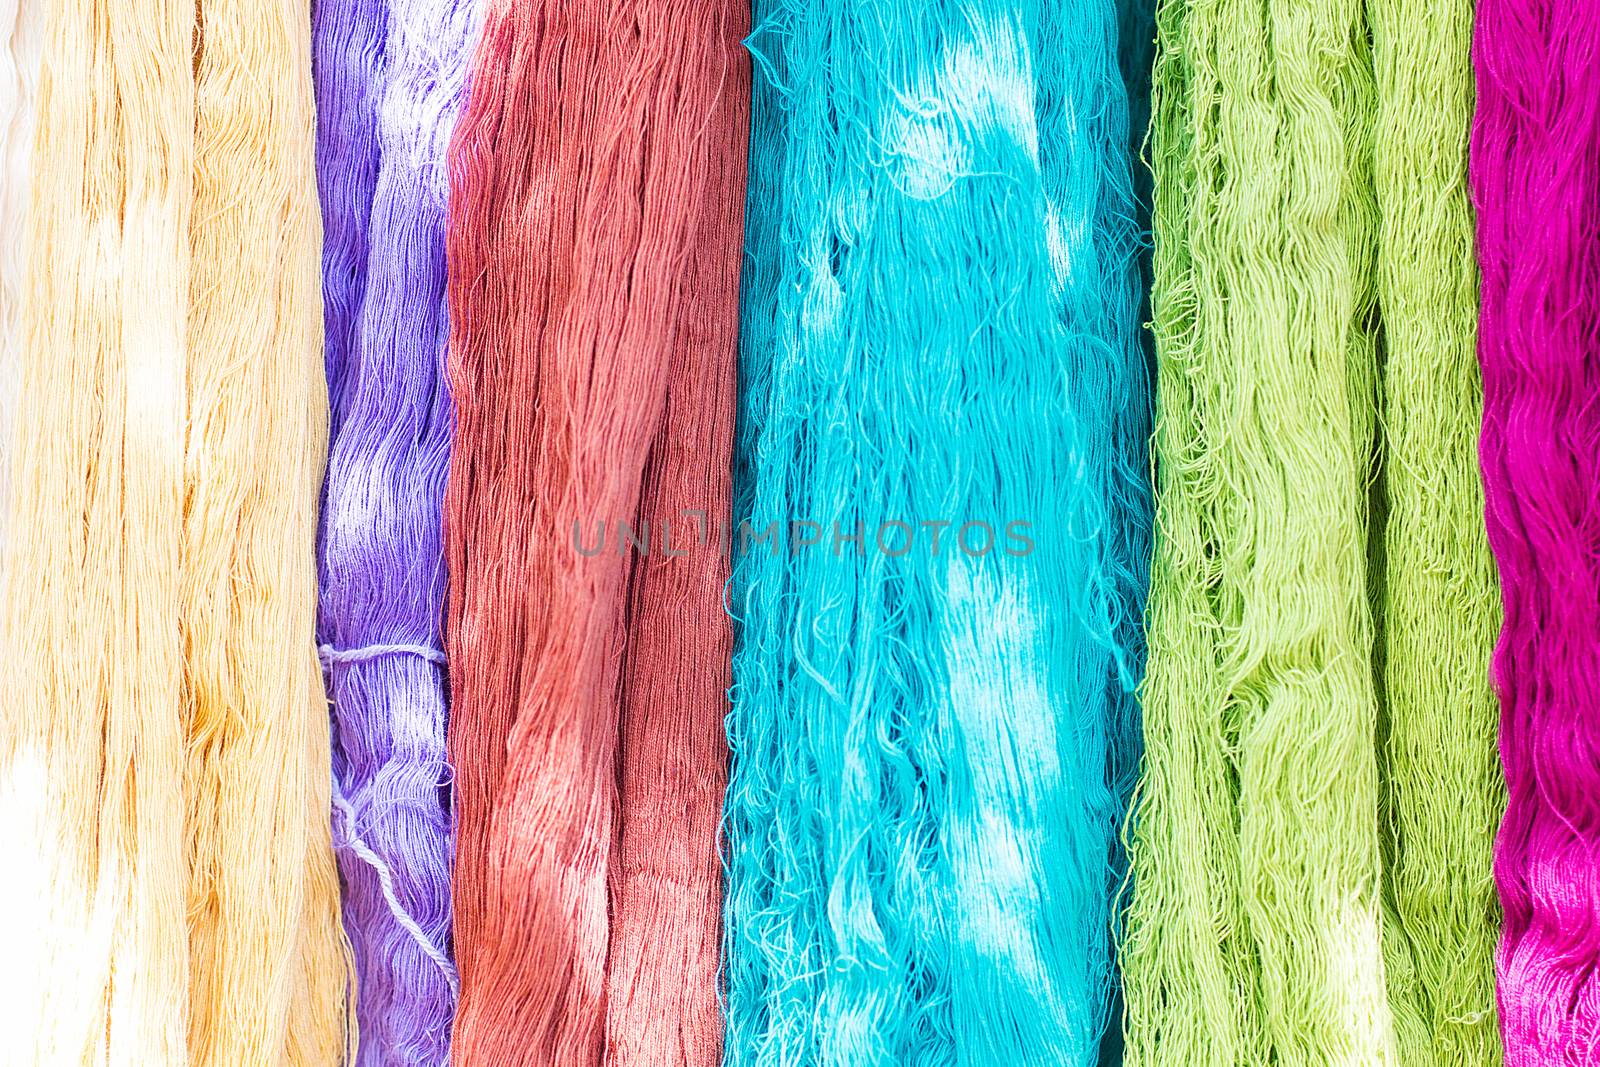 Colorful Of Silk Threads, Fabric Dyeing, Cotton Stained By Natural Subject